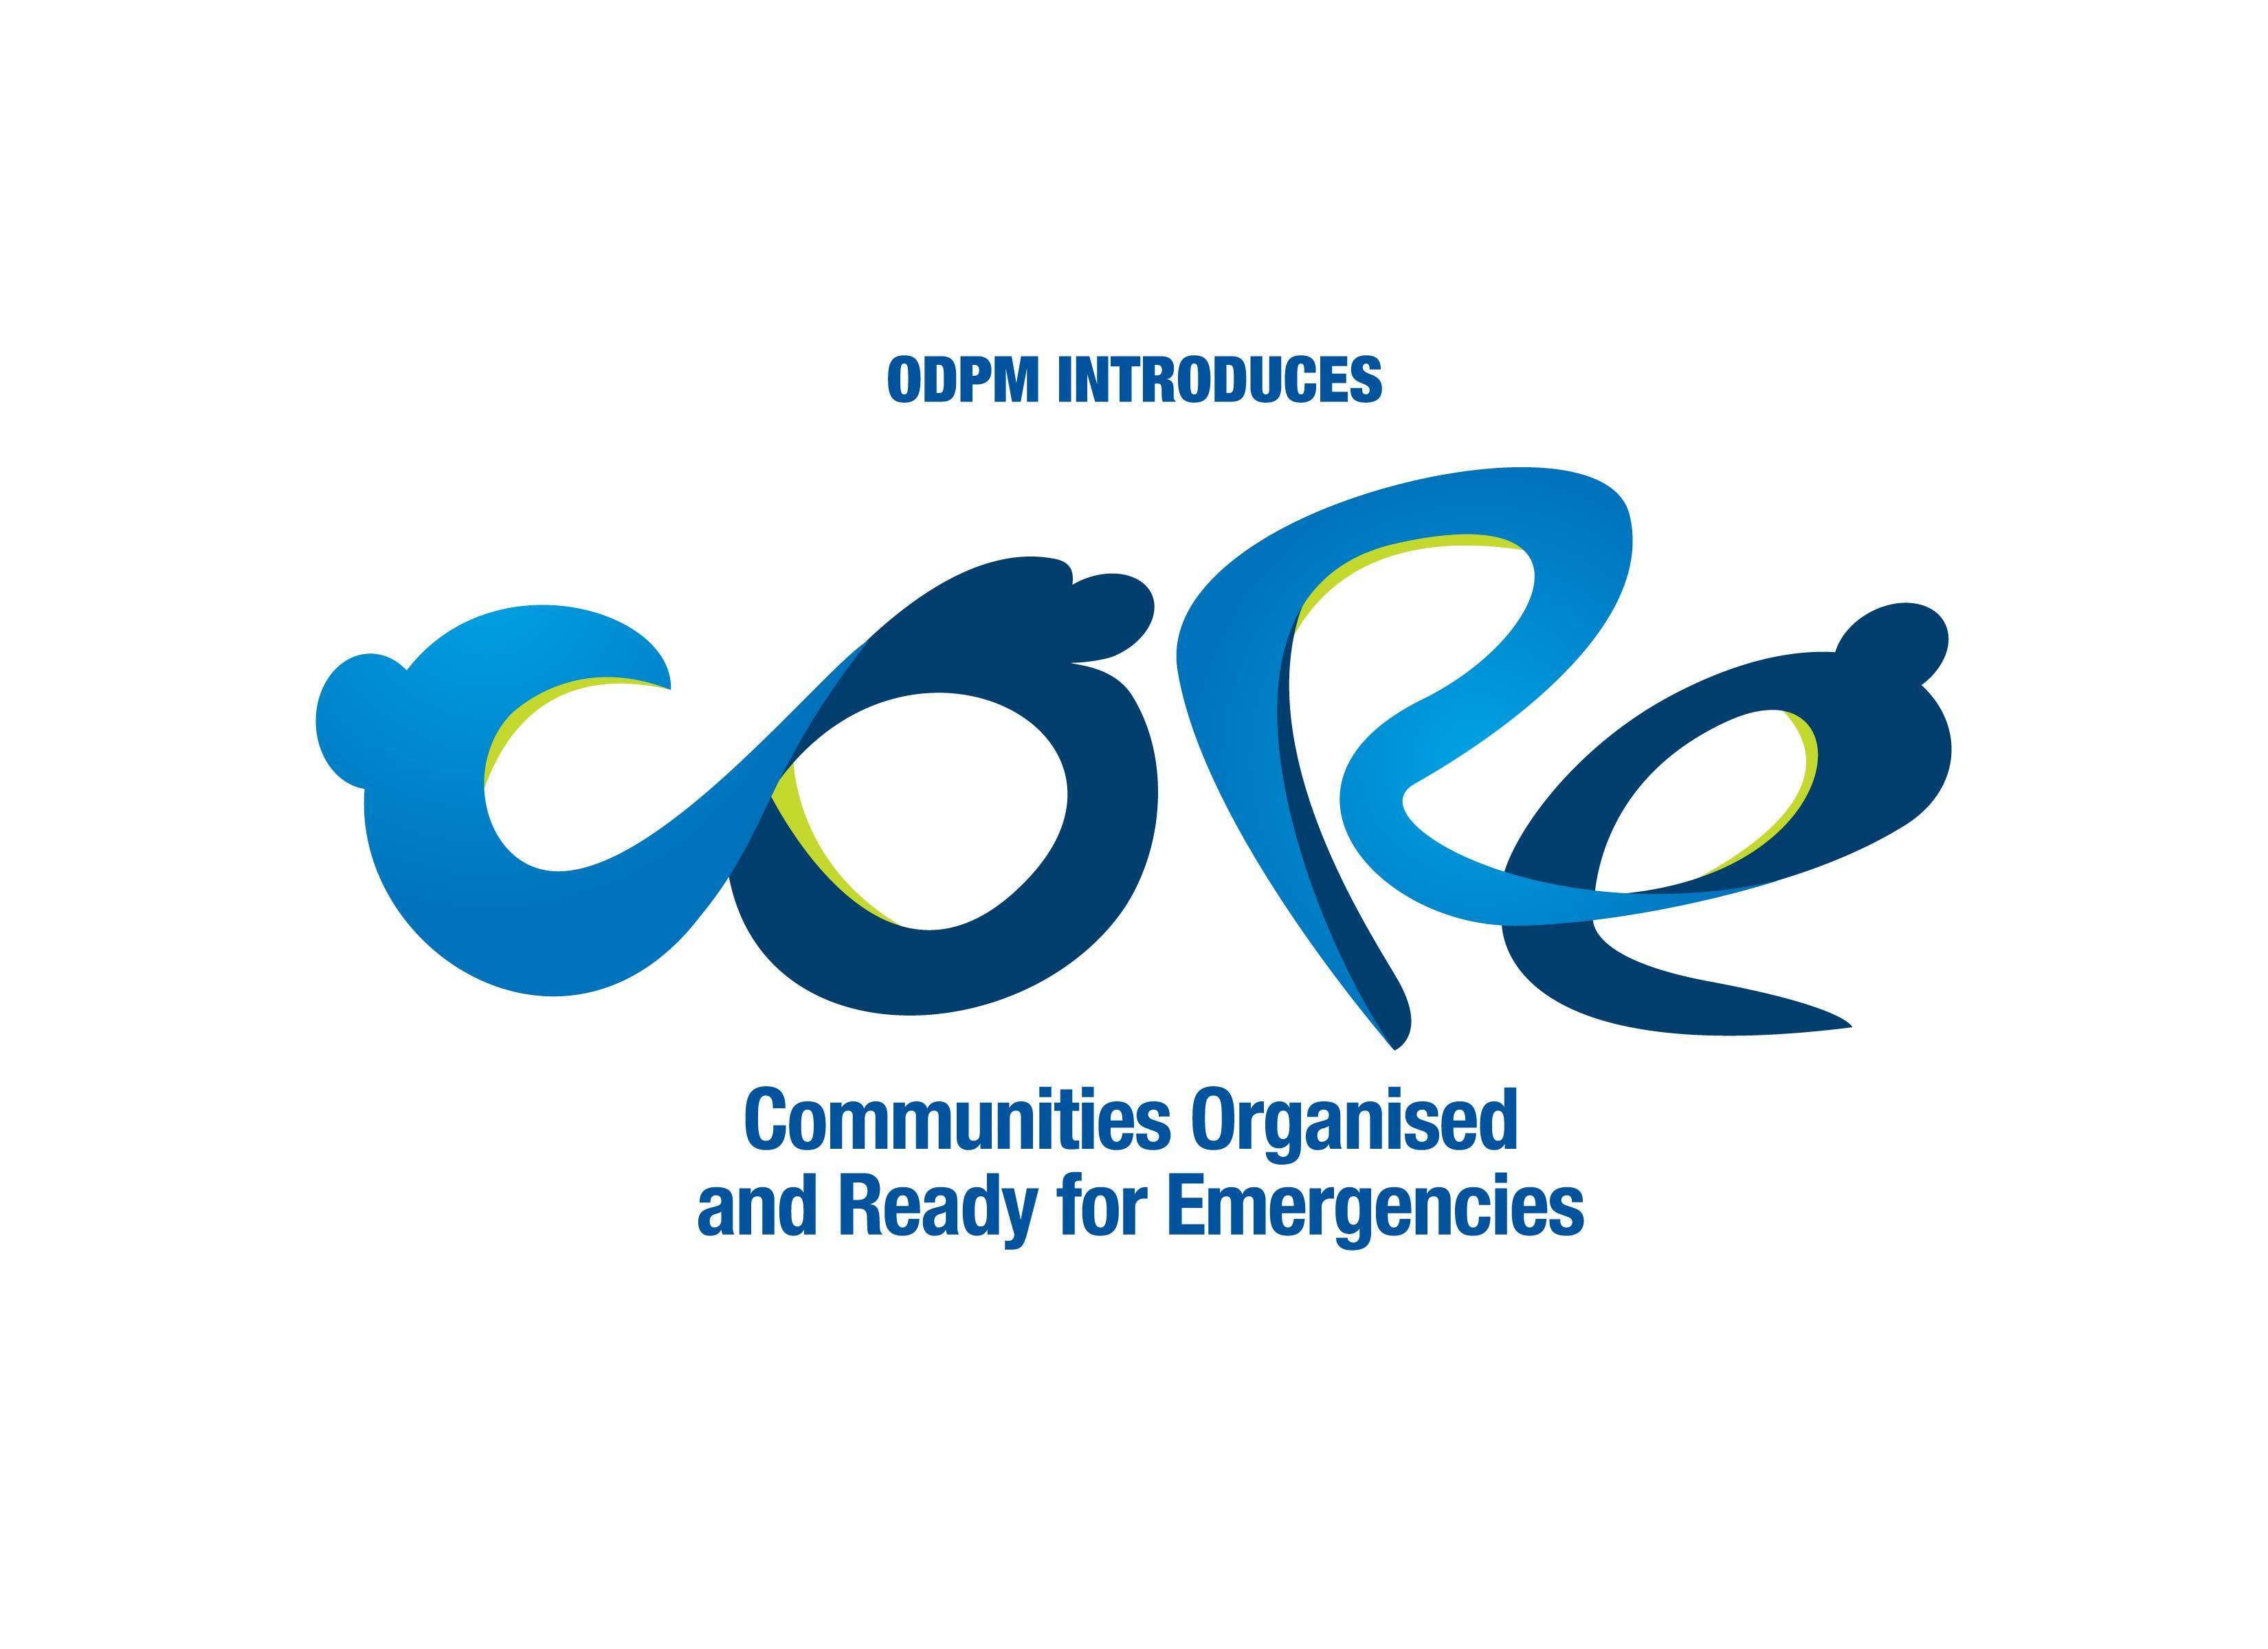 Core Logo - CORE LOGO 2 01 | Office of Disaster Preparedness and Management - ODPM